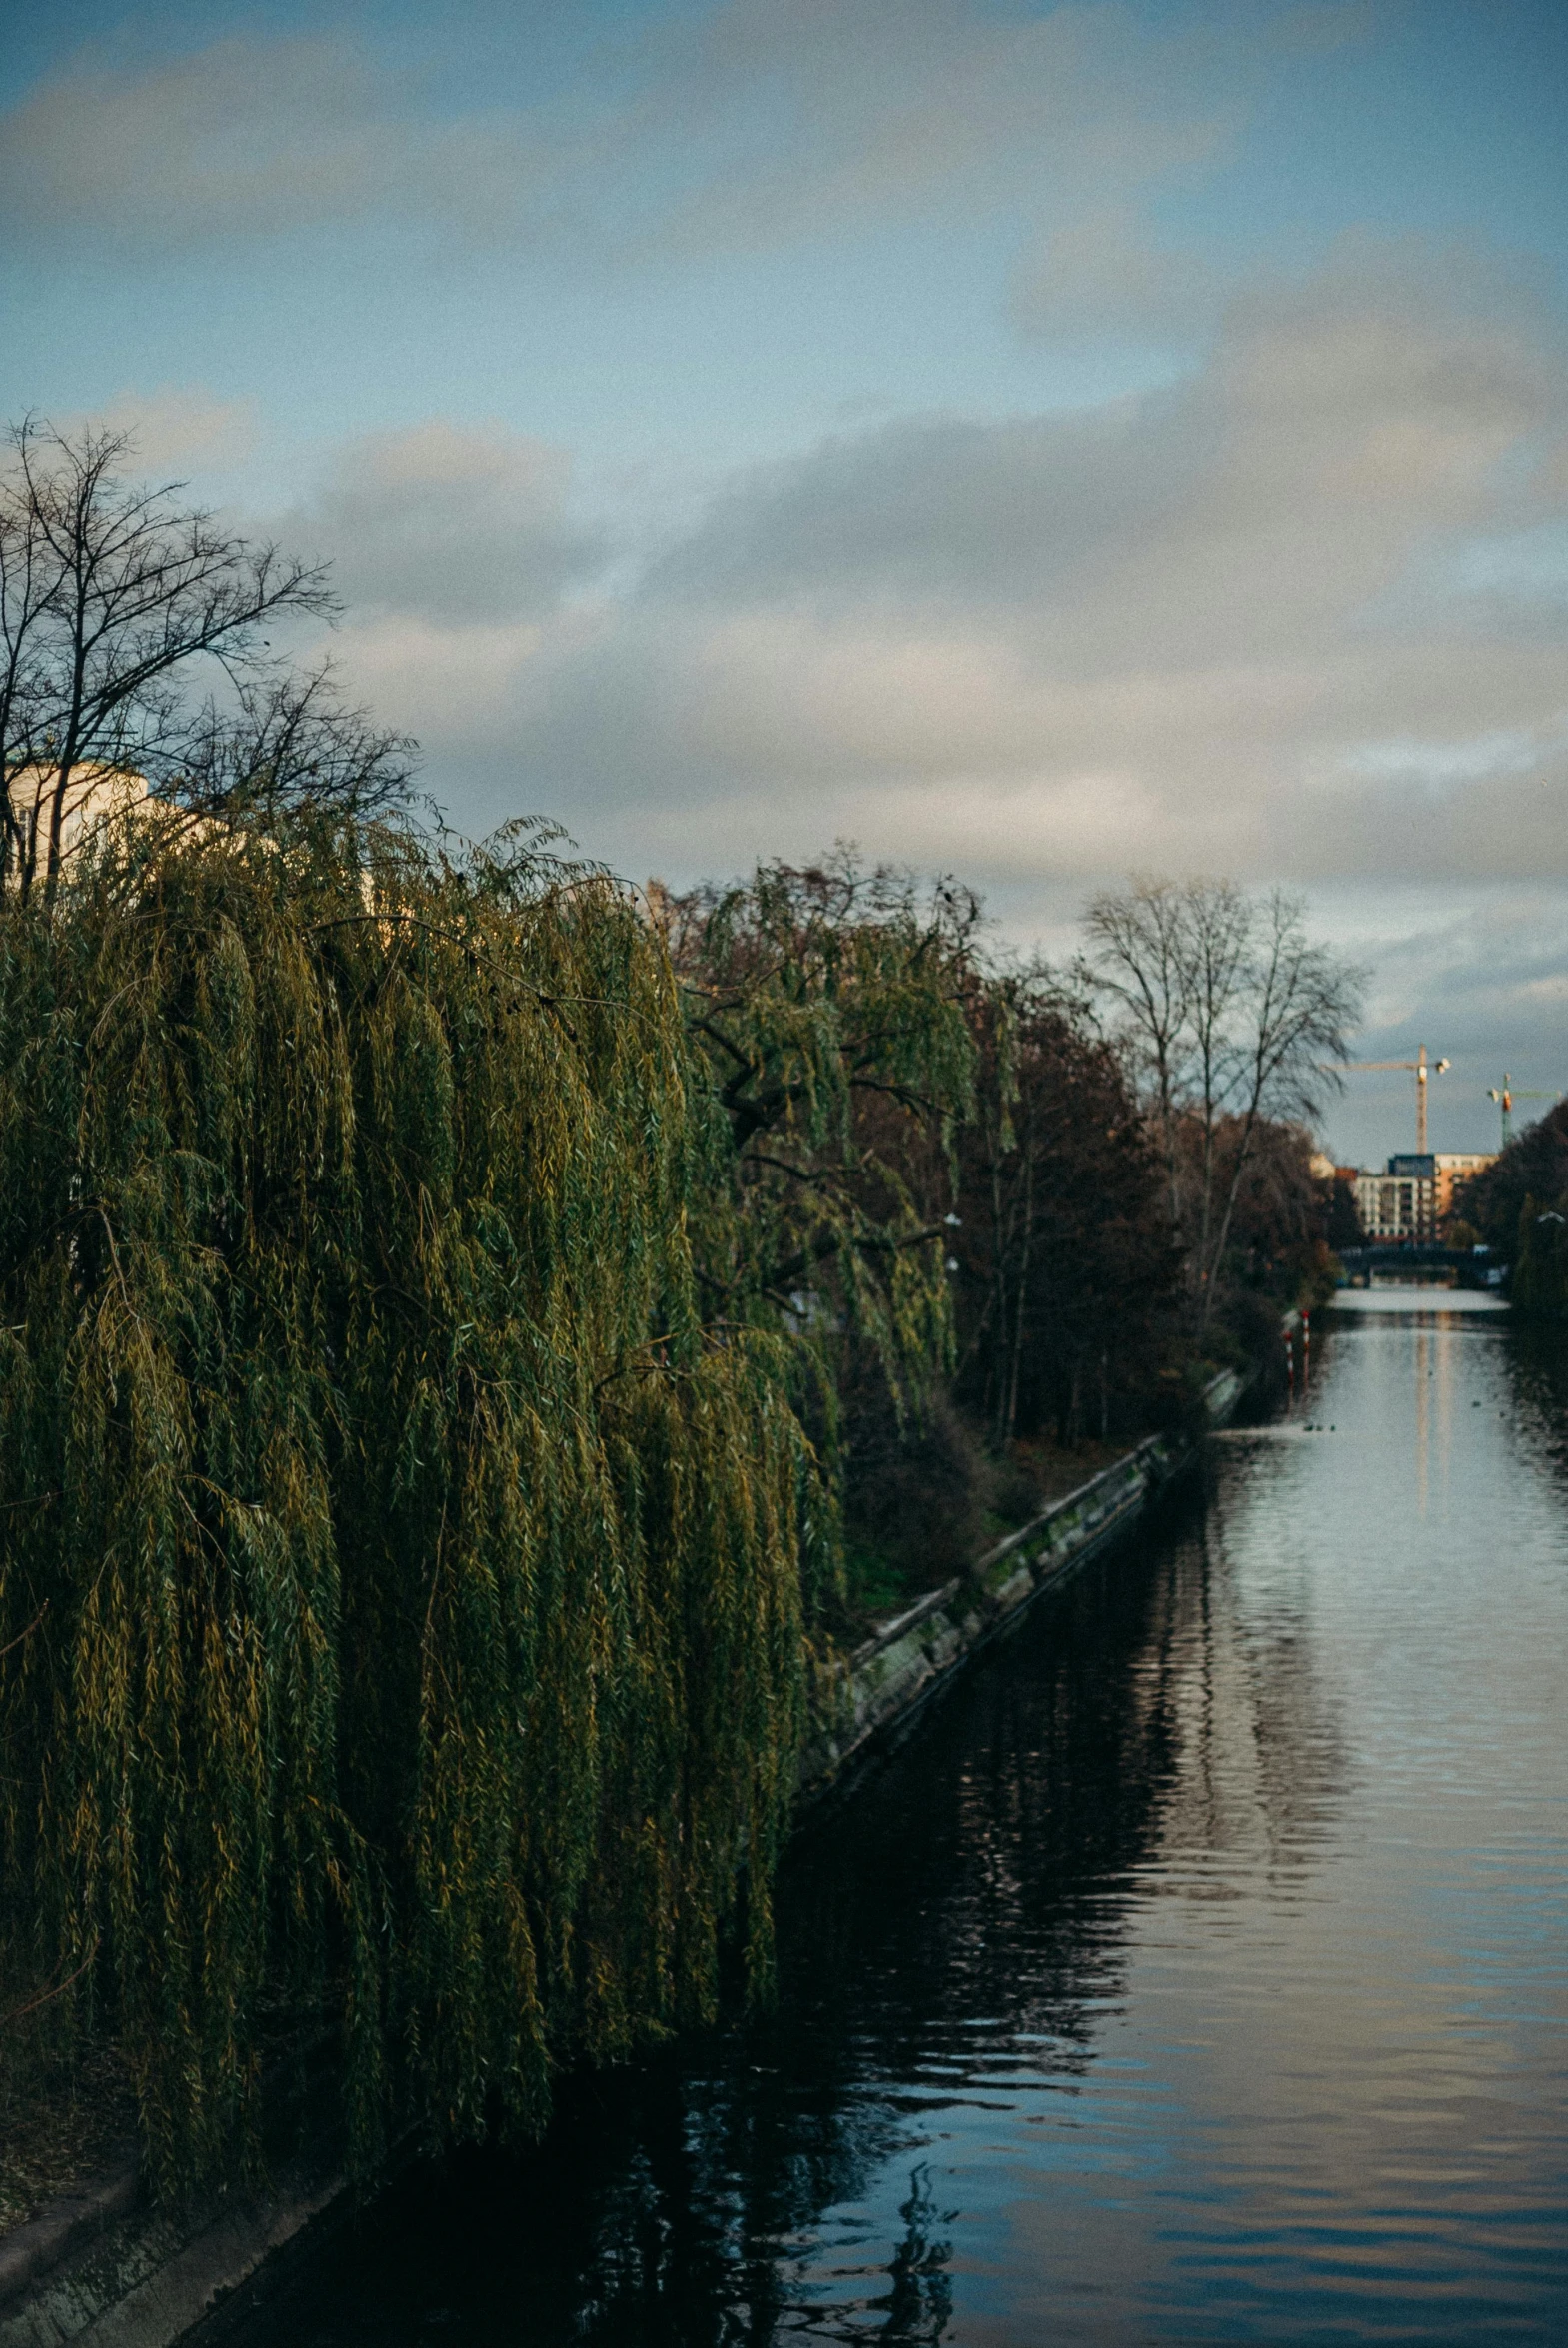 a large body of water surrounded by trees, unsplash, berlin secession, late afternoon, canal, low quality photo, autum